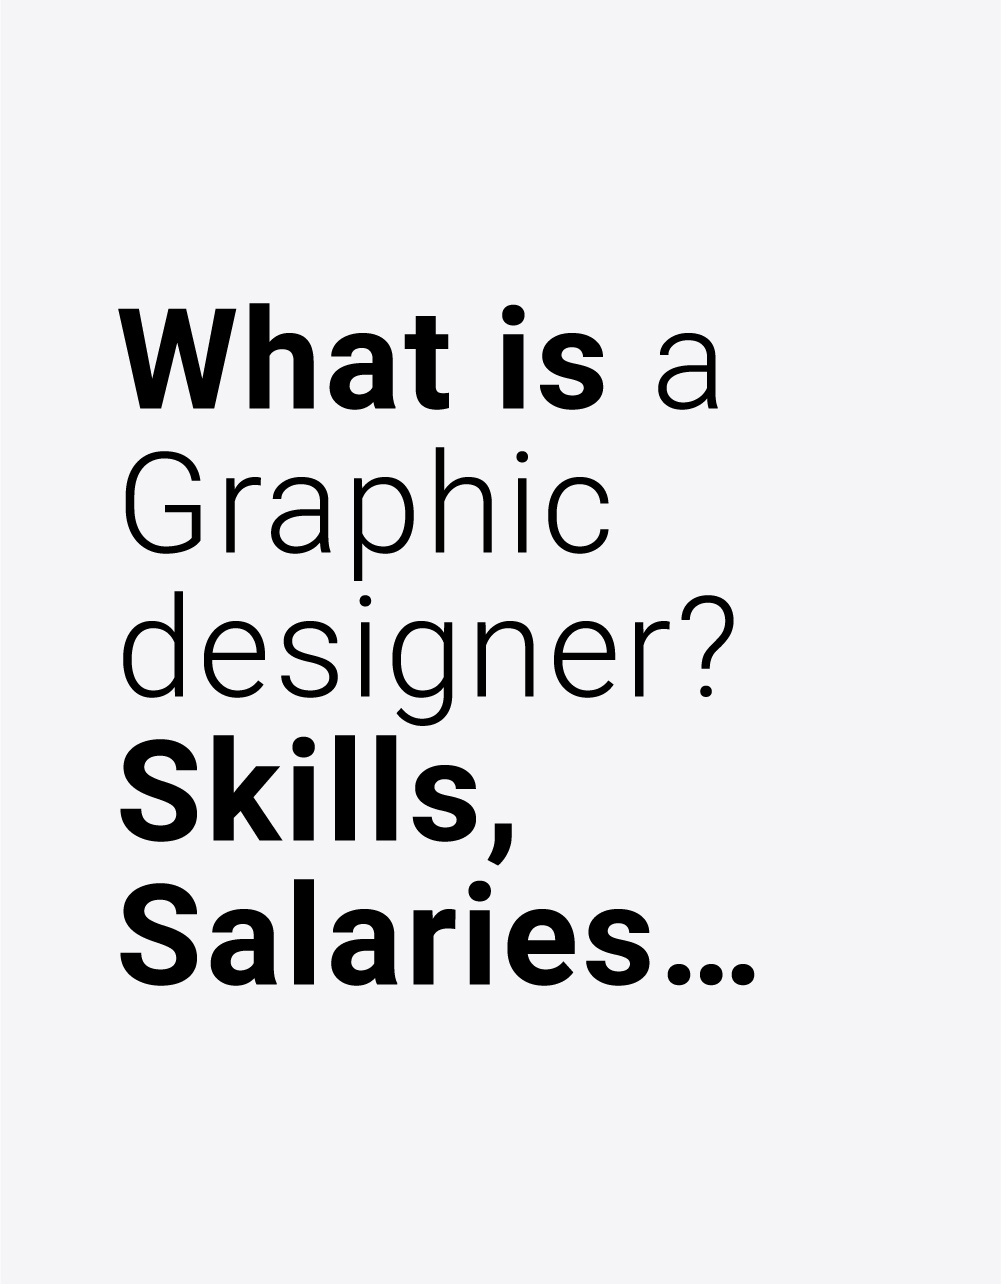 this phrase: What is a Graphic designer? Skills, Salaries... in black color within a white background.